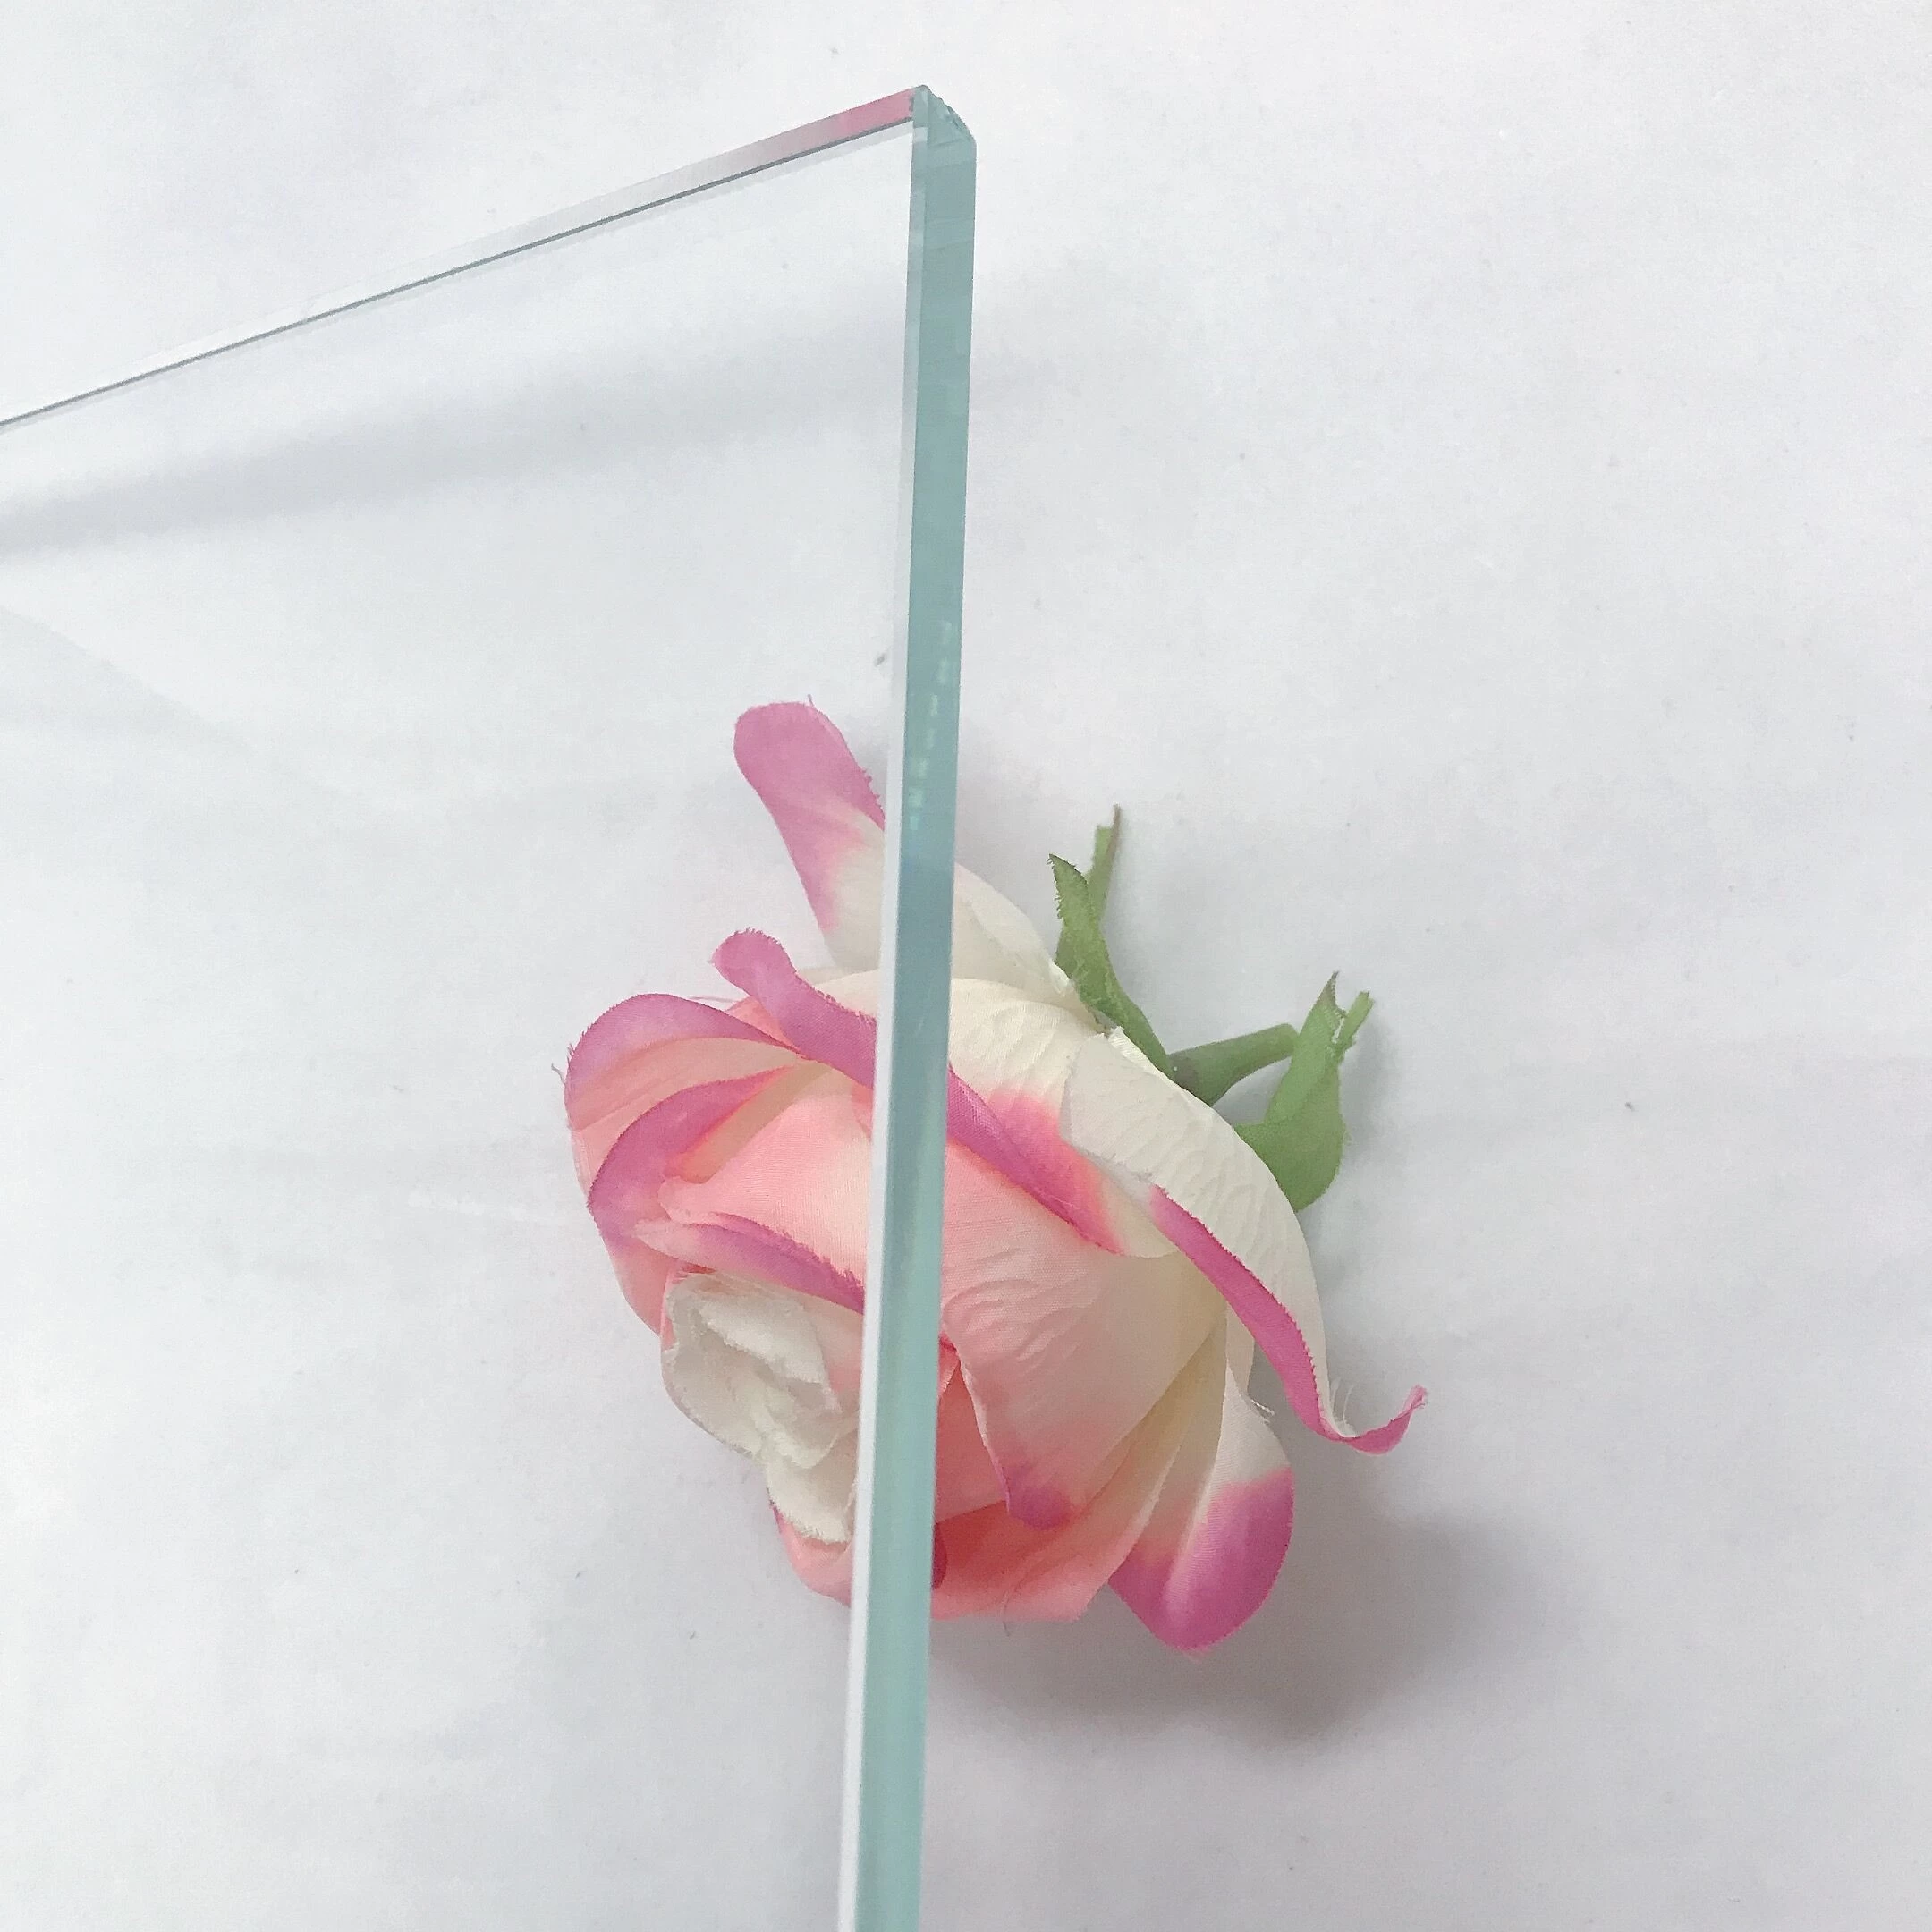 China Professional glass manufacturer,12mm low iron tempered glass ,1/2〃super clear toughen glass